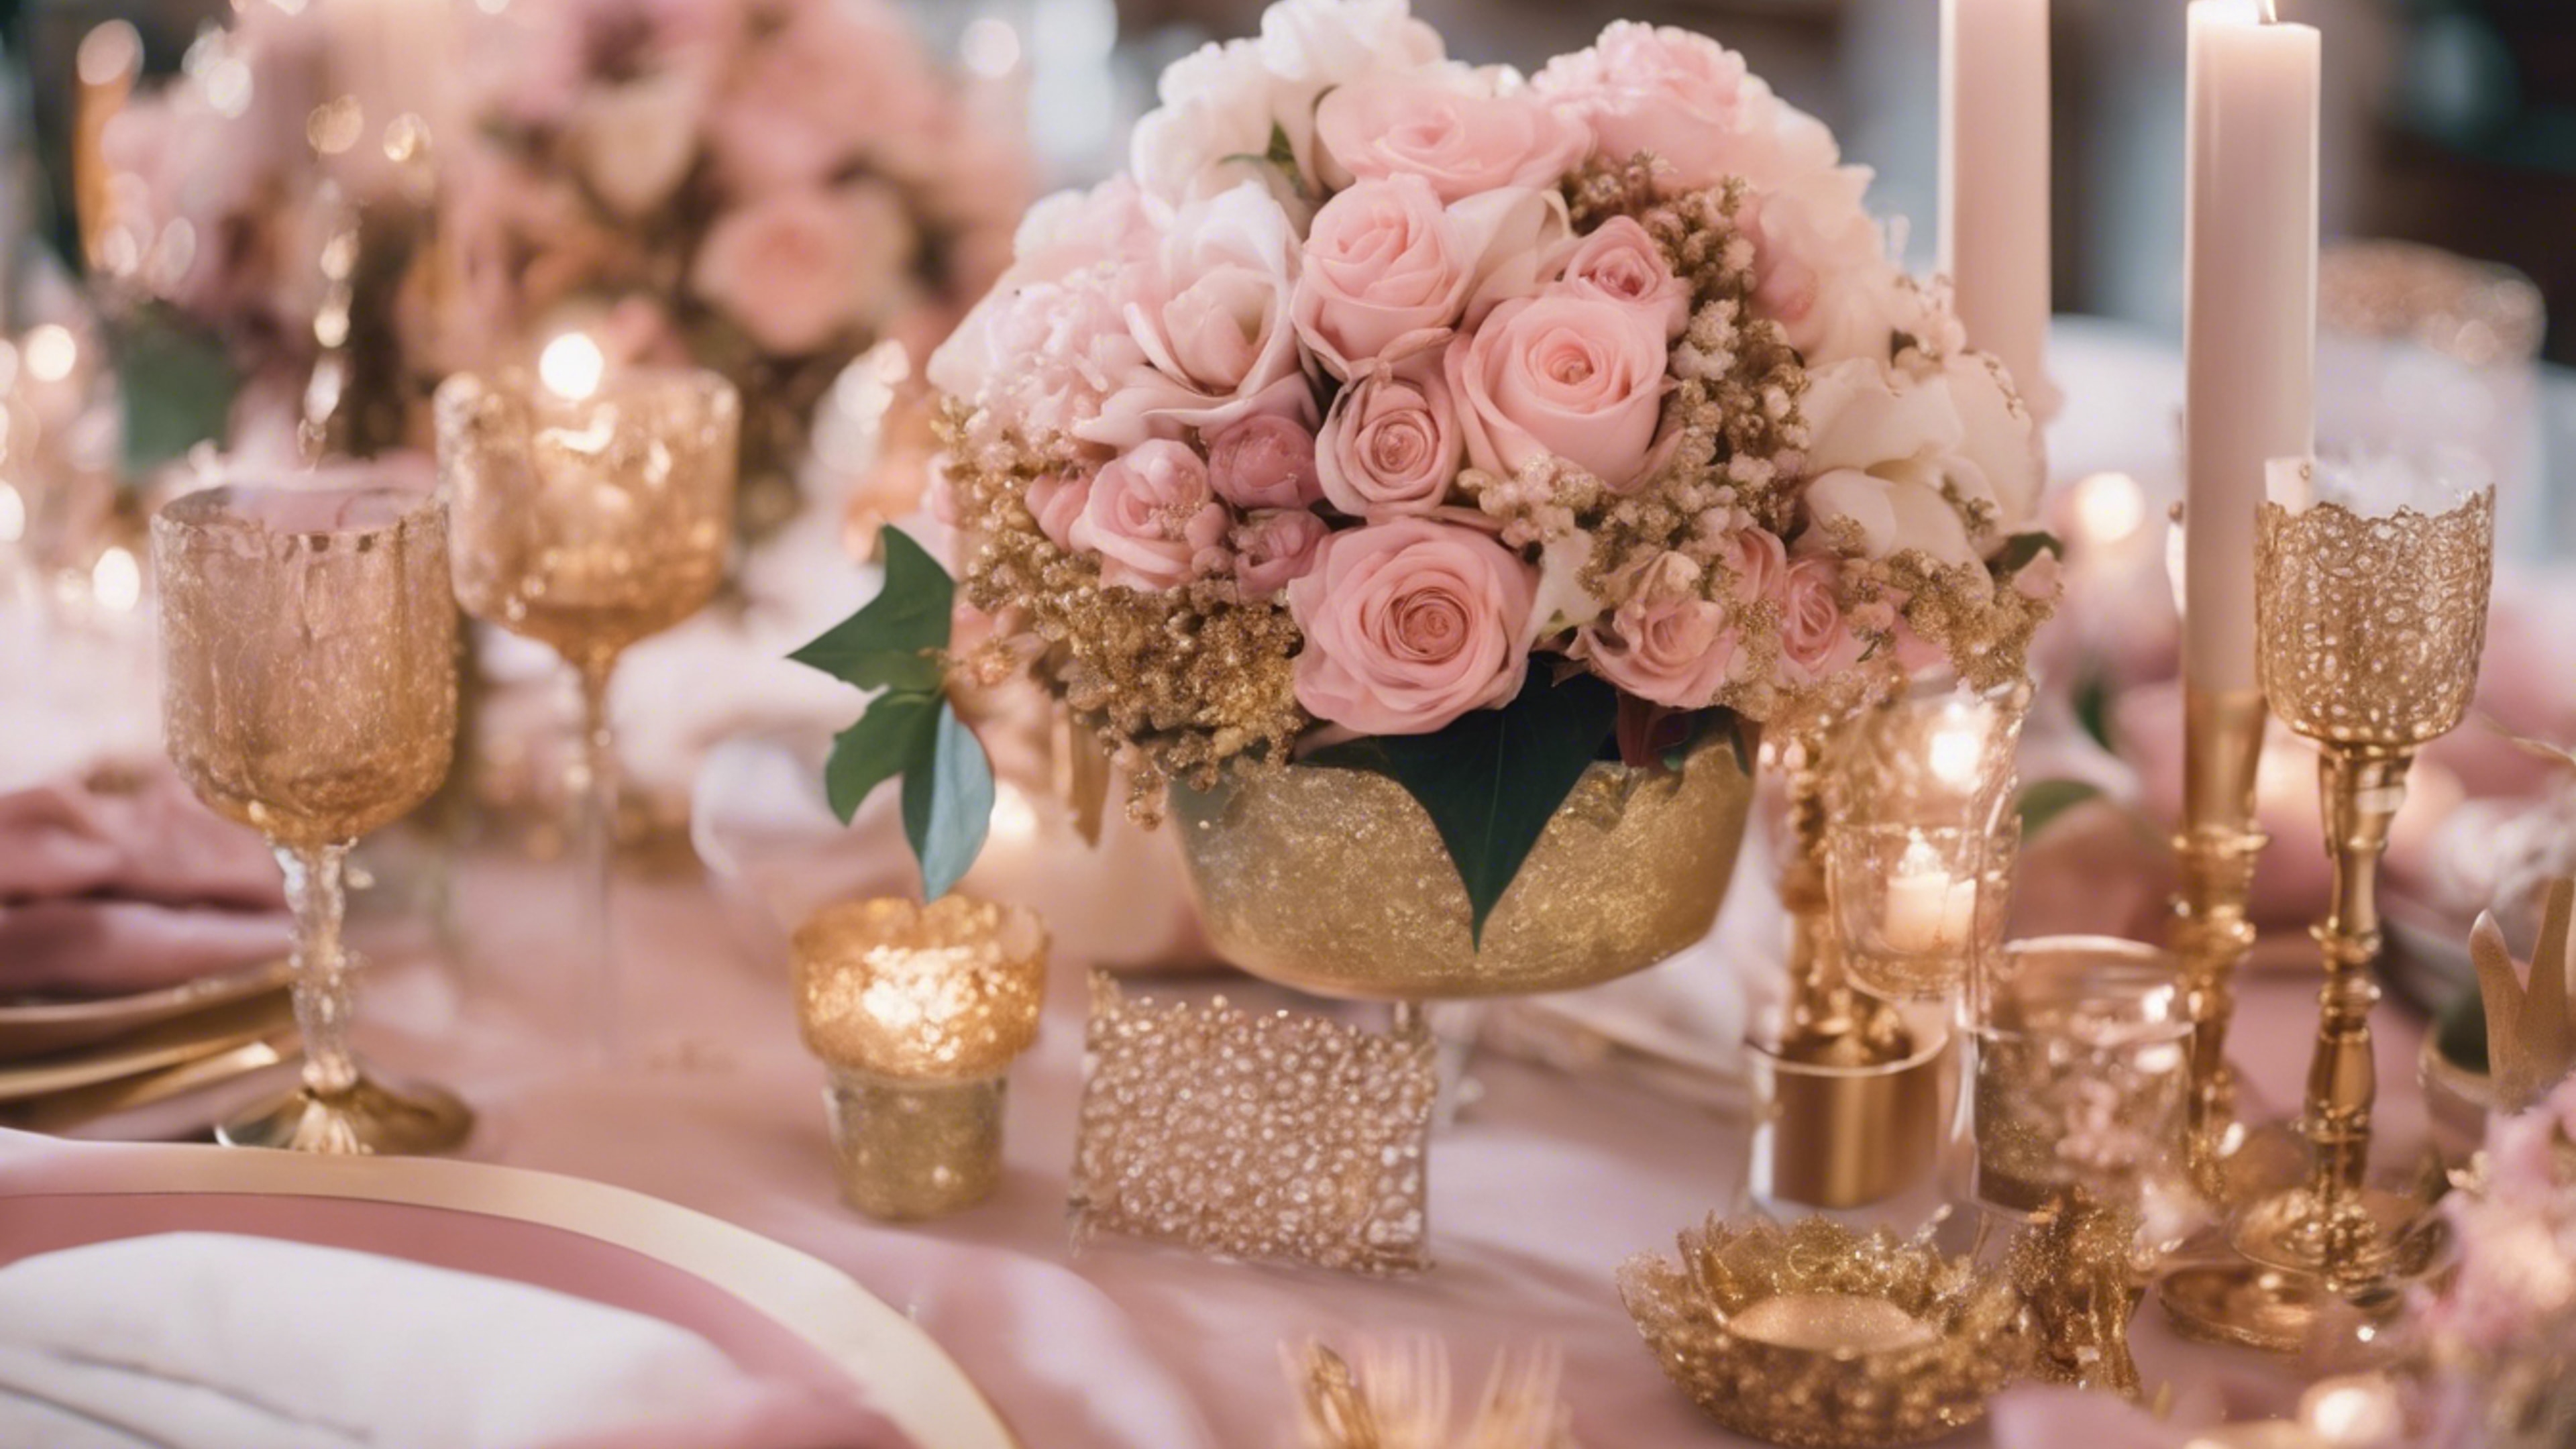 An ethereal pink and gold themed wedding decorations with flowers and metallic accents. Дэлгэцийн зураг[814998f188fb45f48f1c]